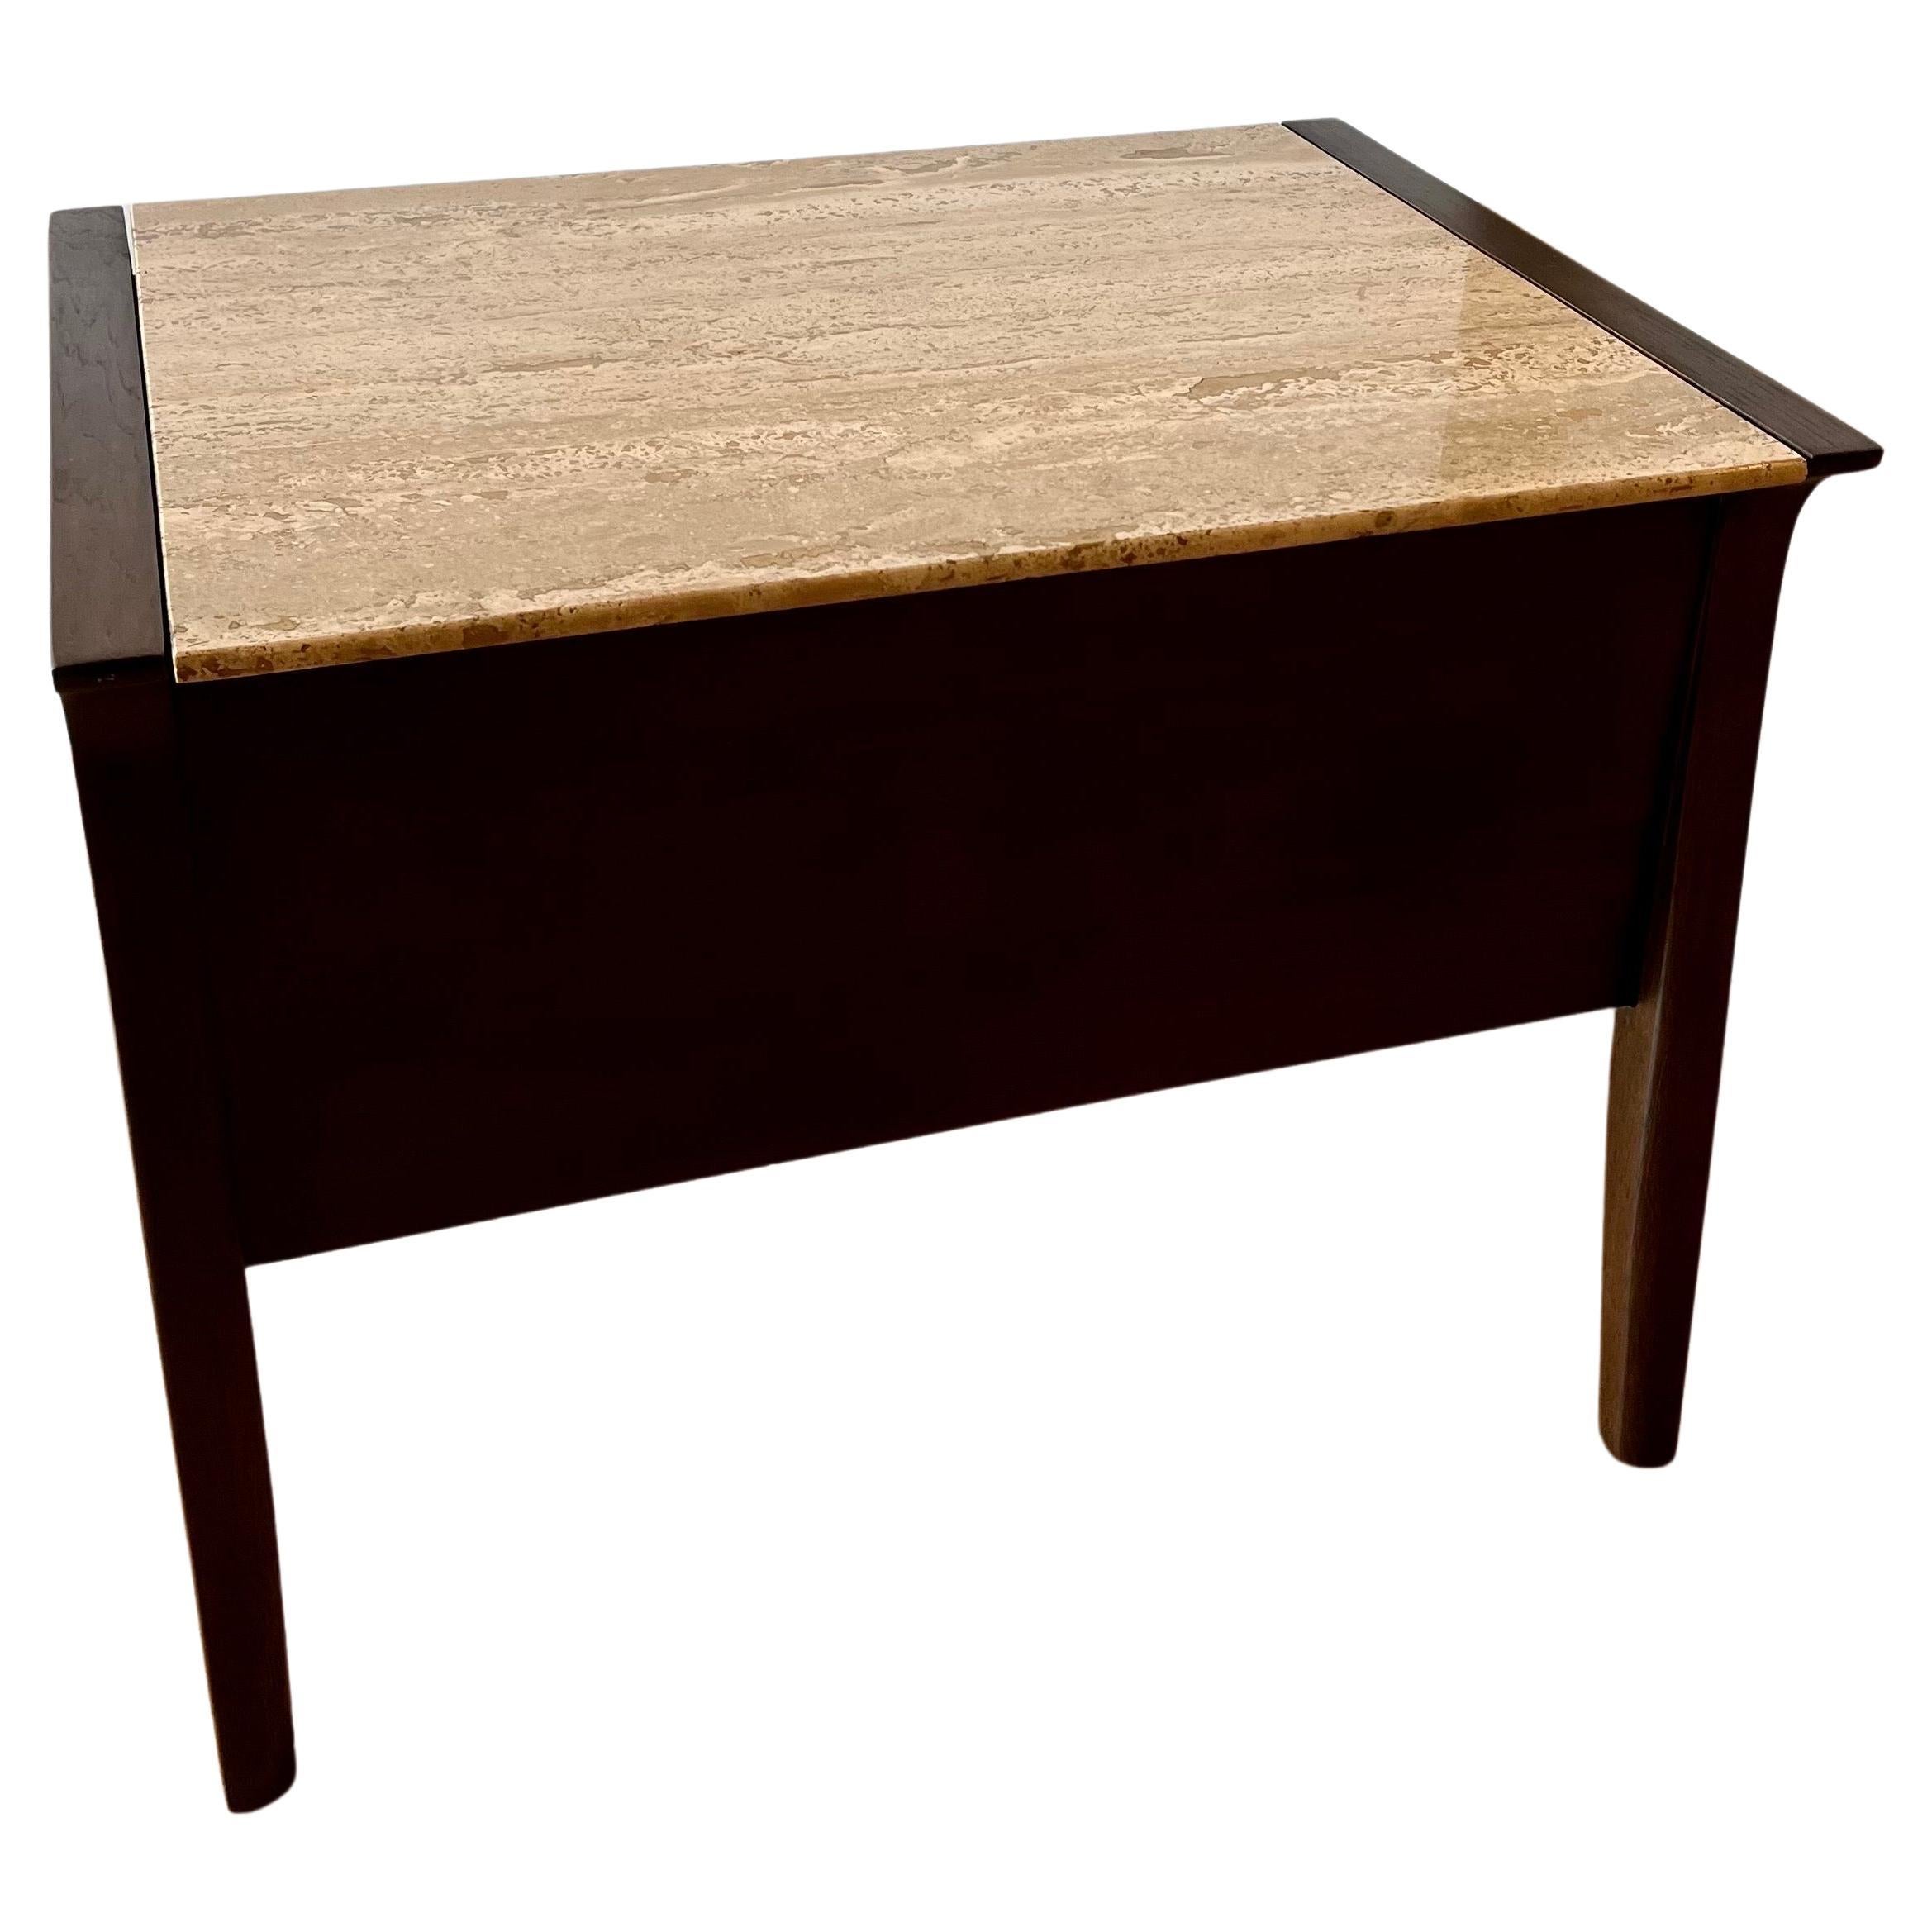 American Mid-Century Modern End Table Travertine by John Van Koert for Drexel In Excellent Condition For Sale In San Diego, CA